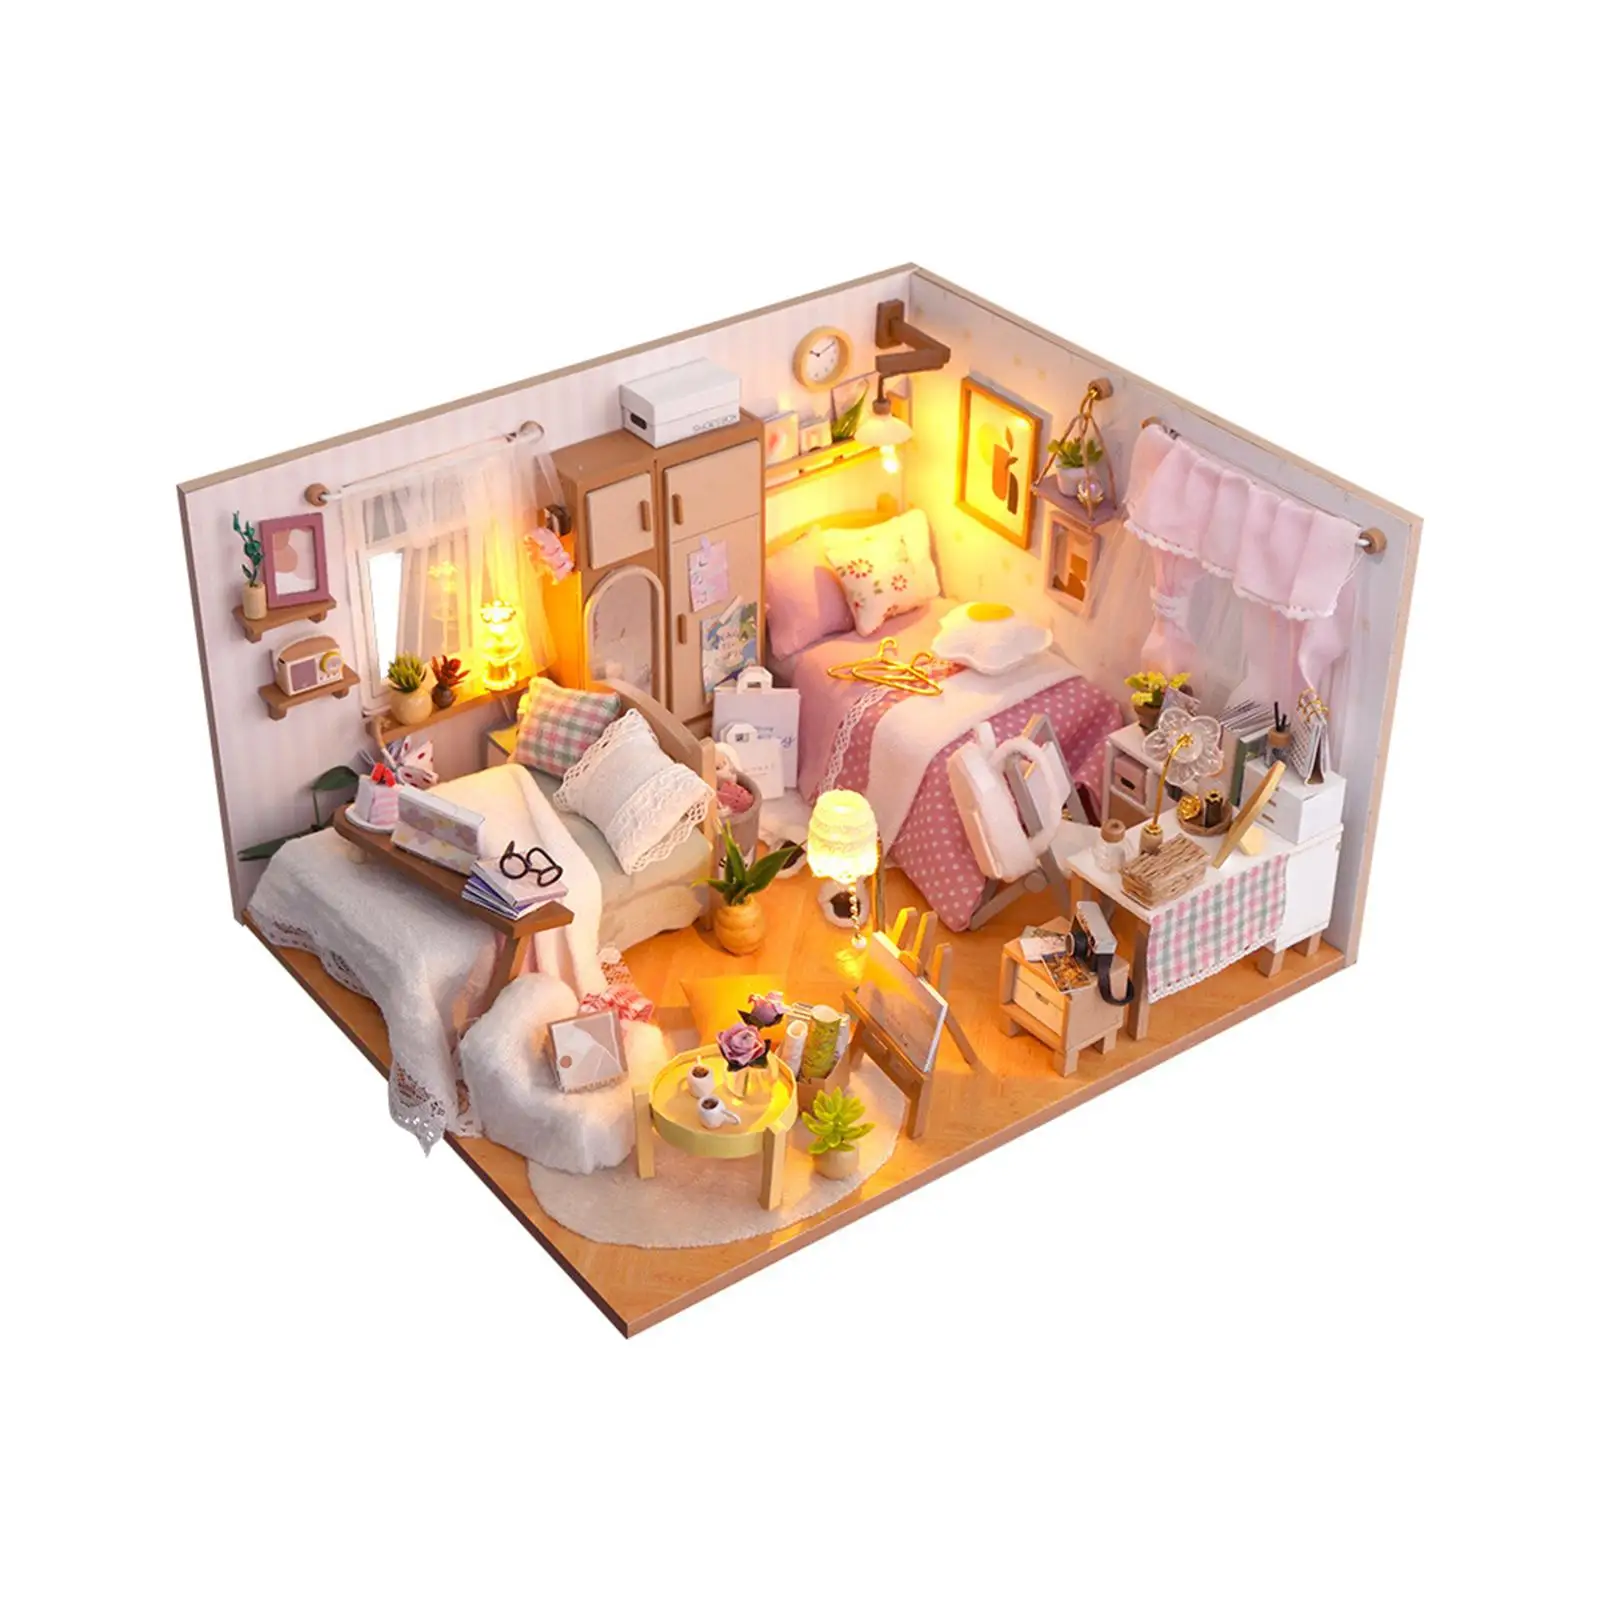 DIY Wooden Miniature Dollhouse Kits Modern Easy to Assemble Creative Bedroom